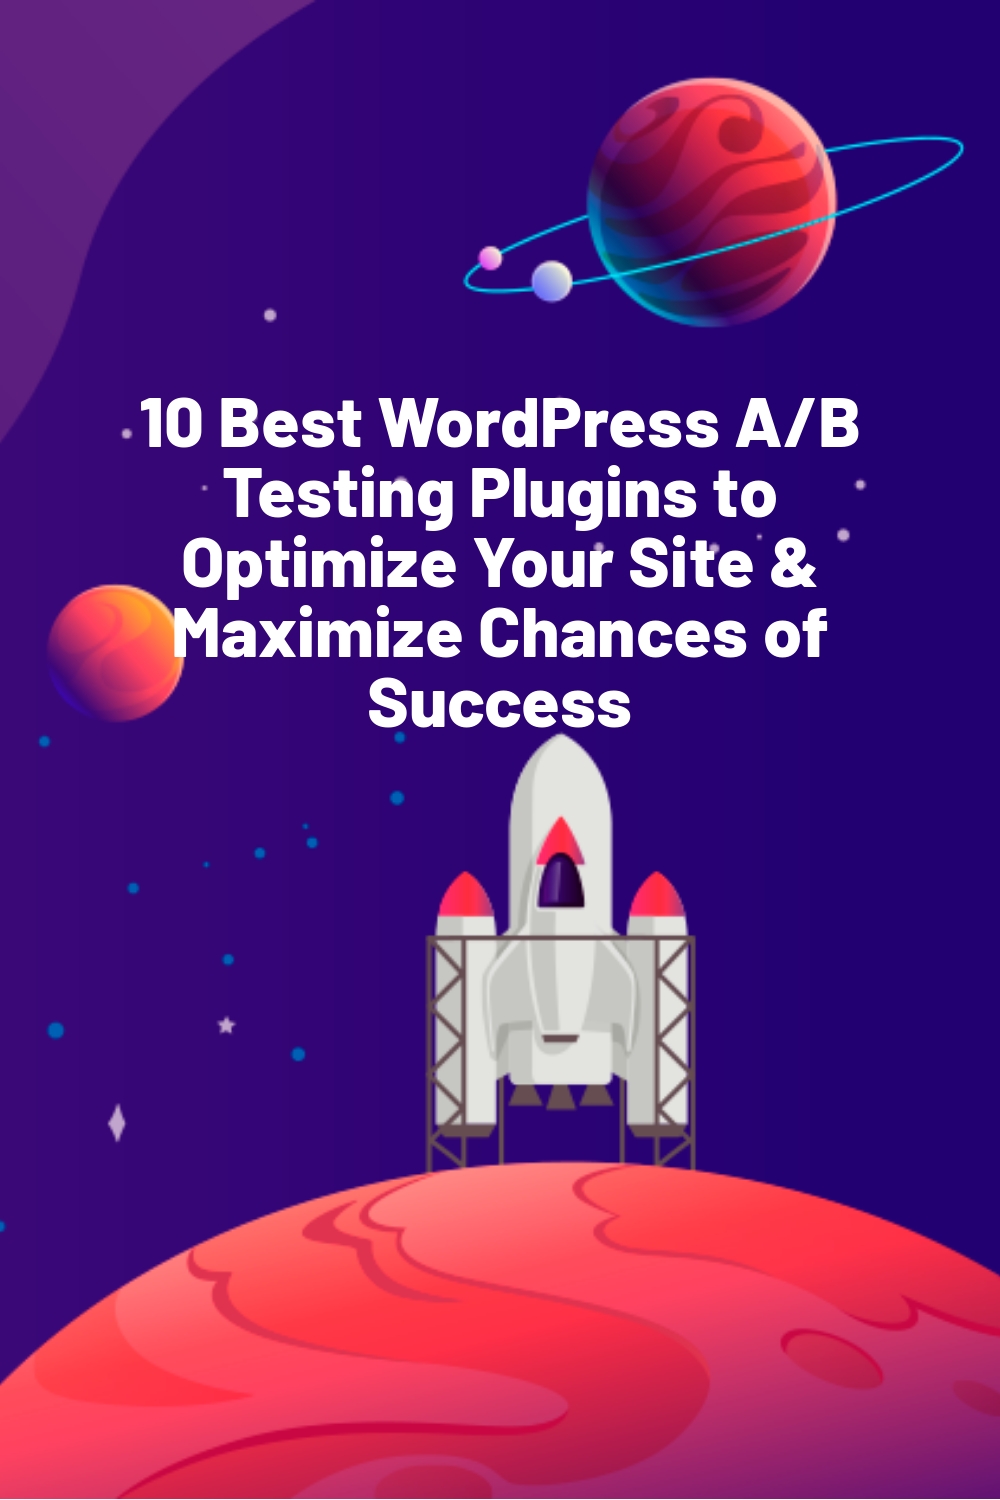 10 Best WordPress A/B Testing Plugins to Optimize Your Site & Maximize Chances of Success